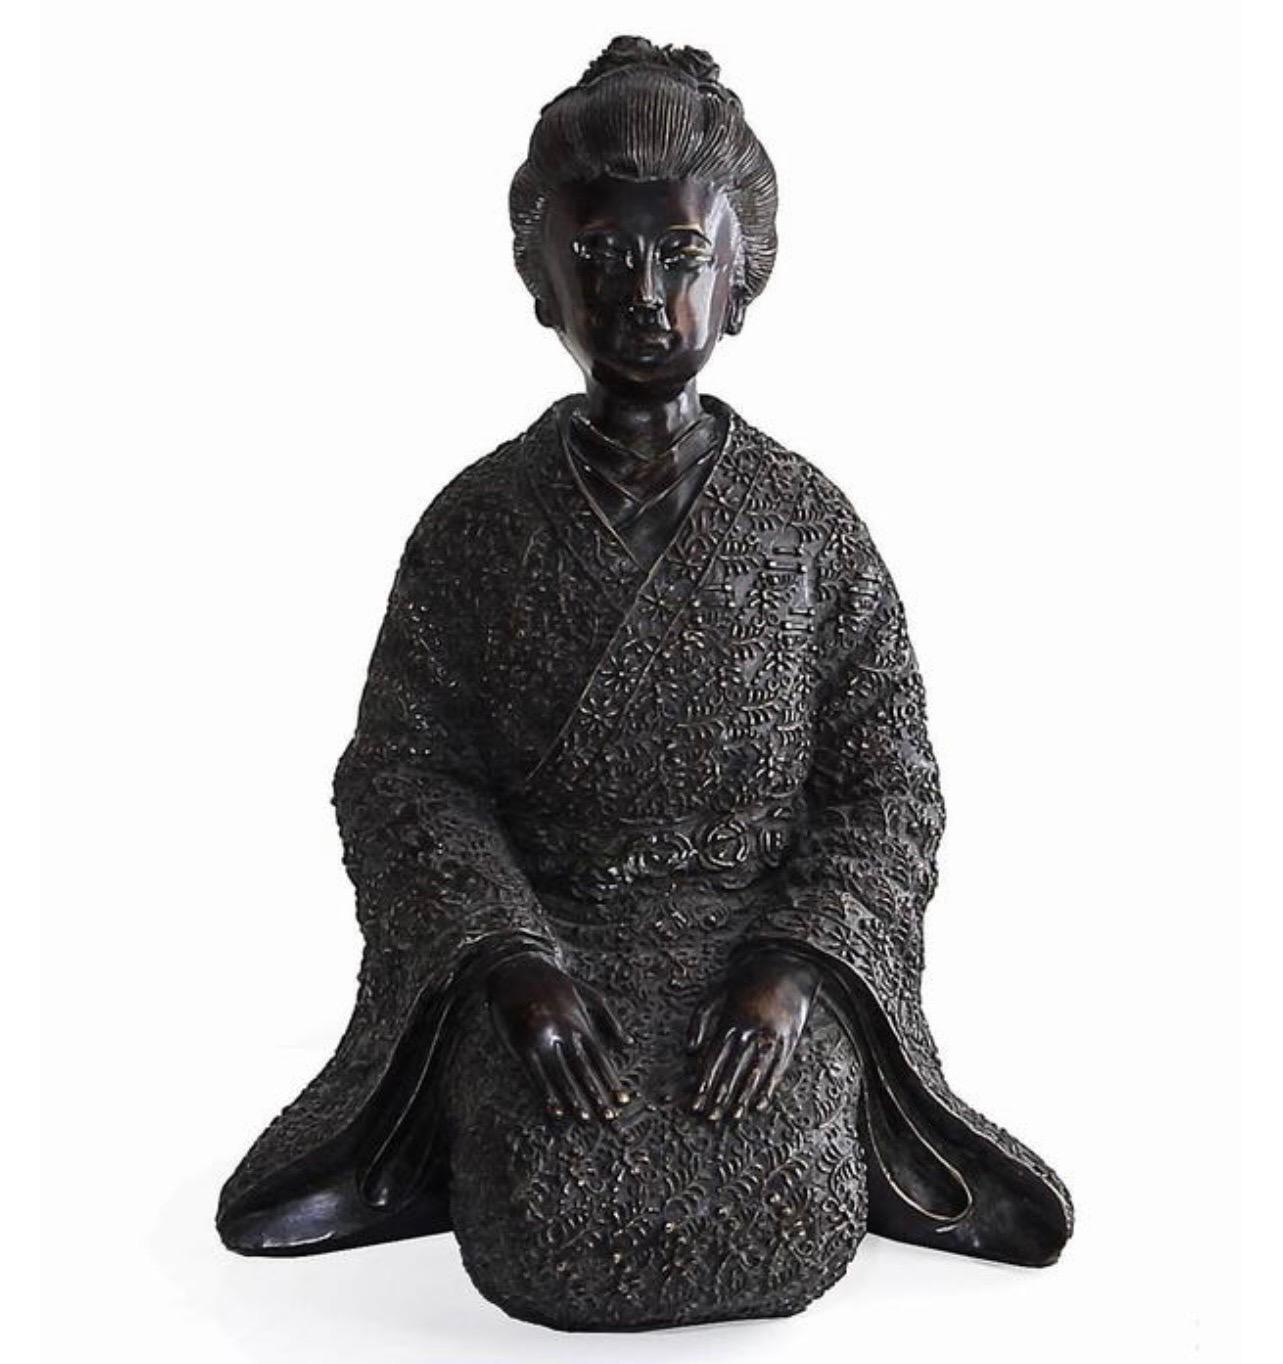 A beautiful pair of Japanese inspired bronze statues by the Maitland-Smith company. Includes one geisha figure and one samurai, both in a kneeling position. Details on the figures, robes, faces and hair are done in high relief with high level